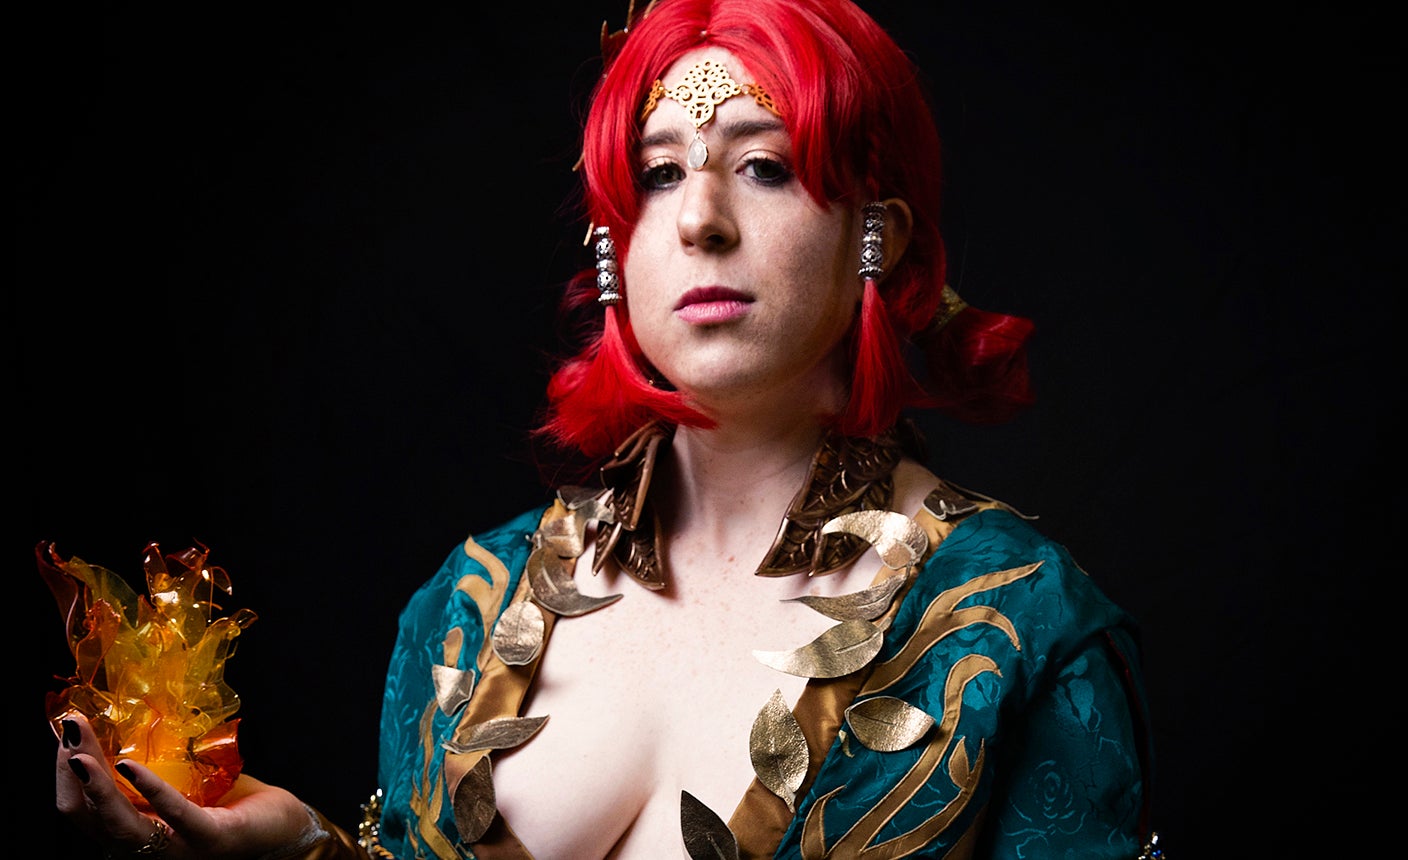 Cornetto Cosplay as Triss Merigold from The Witcher 3: Wild Hunt video game.